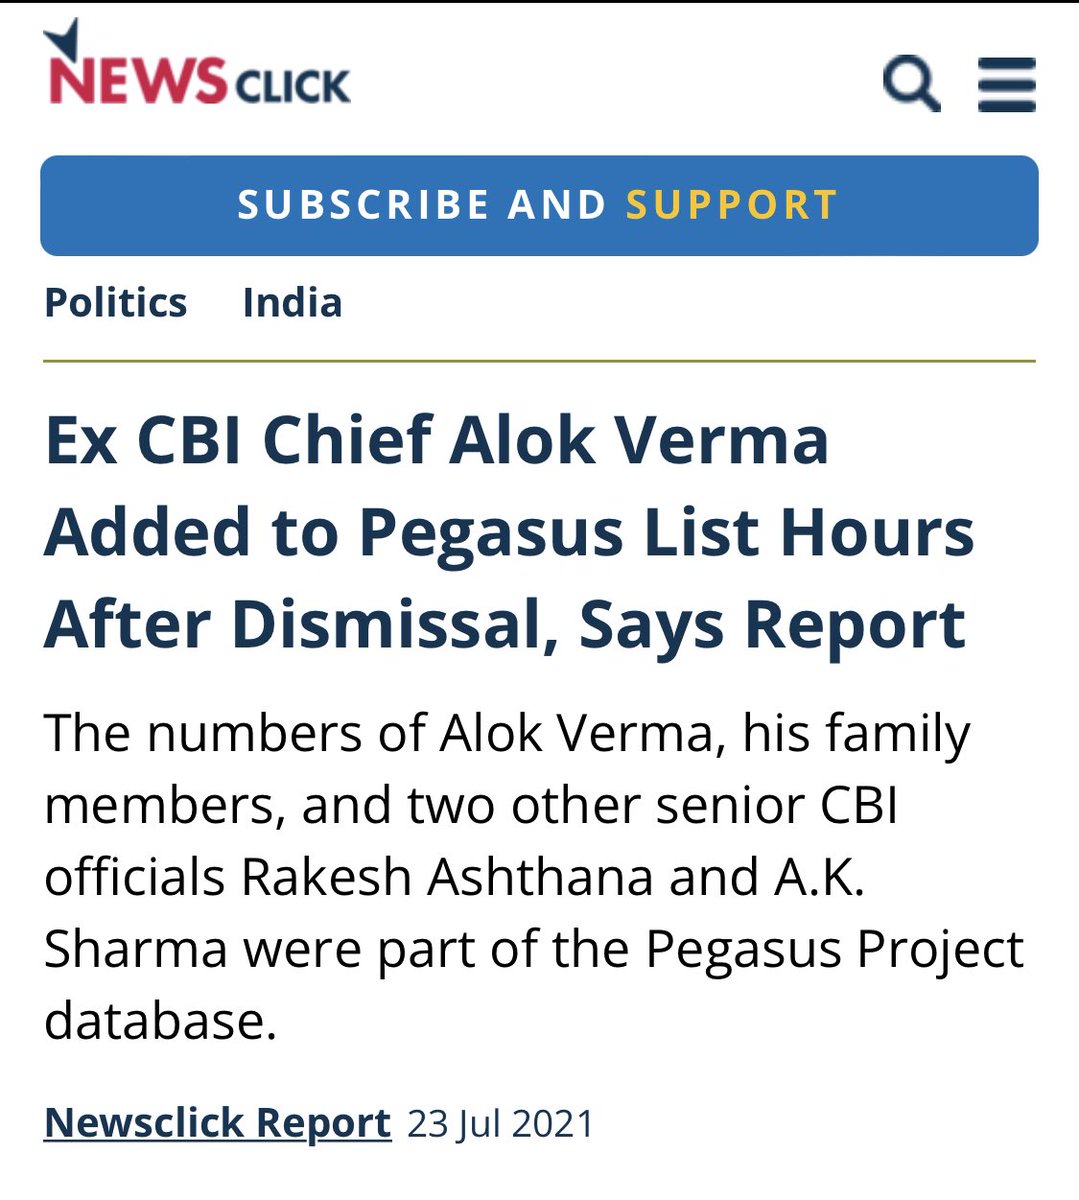 CBI had evidence of corruption in the #RafaleDeal since October 2018.

Alok Verma tried to move forward on the allegations, Modi Govt launched a midnight raid on the CBI HQ & sealed the CBI chiefs office.

Verma, was replaced by lackey Nageshwar Rao.

Investigation killed ?